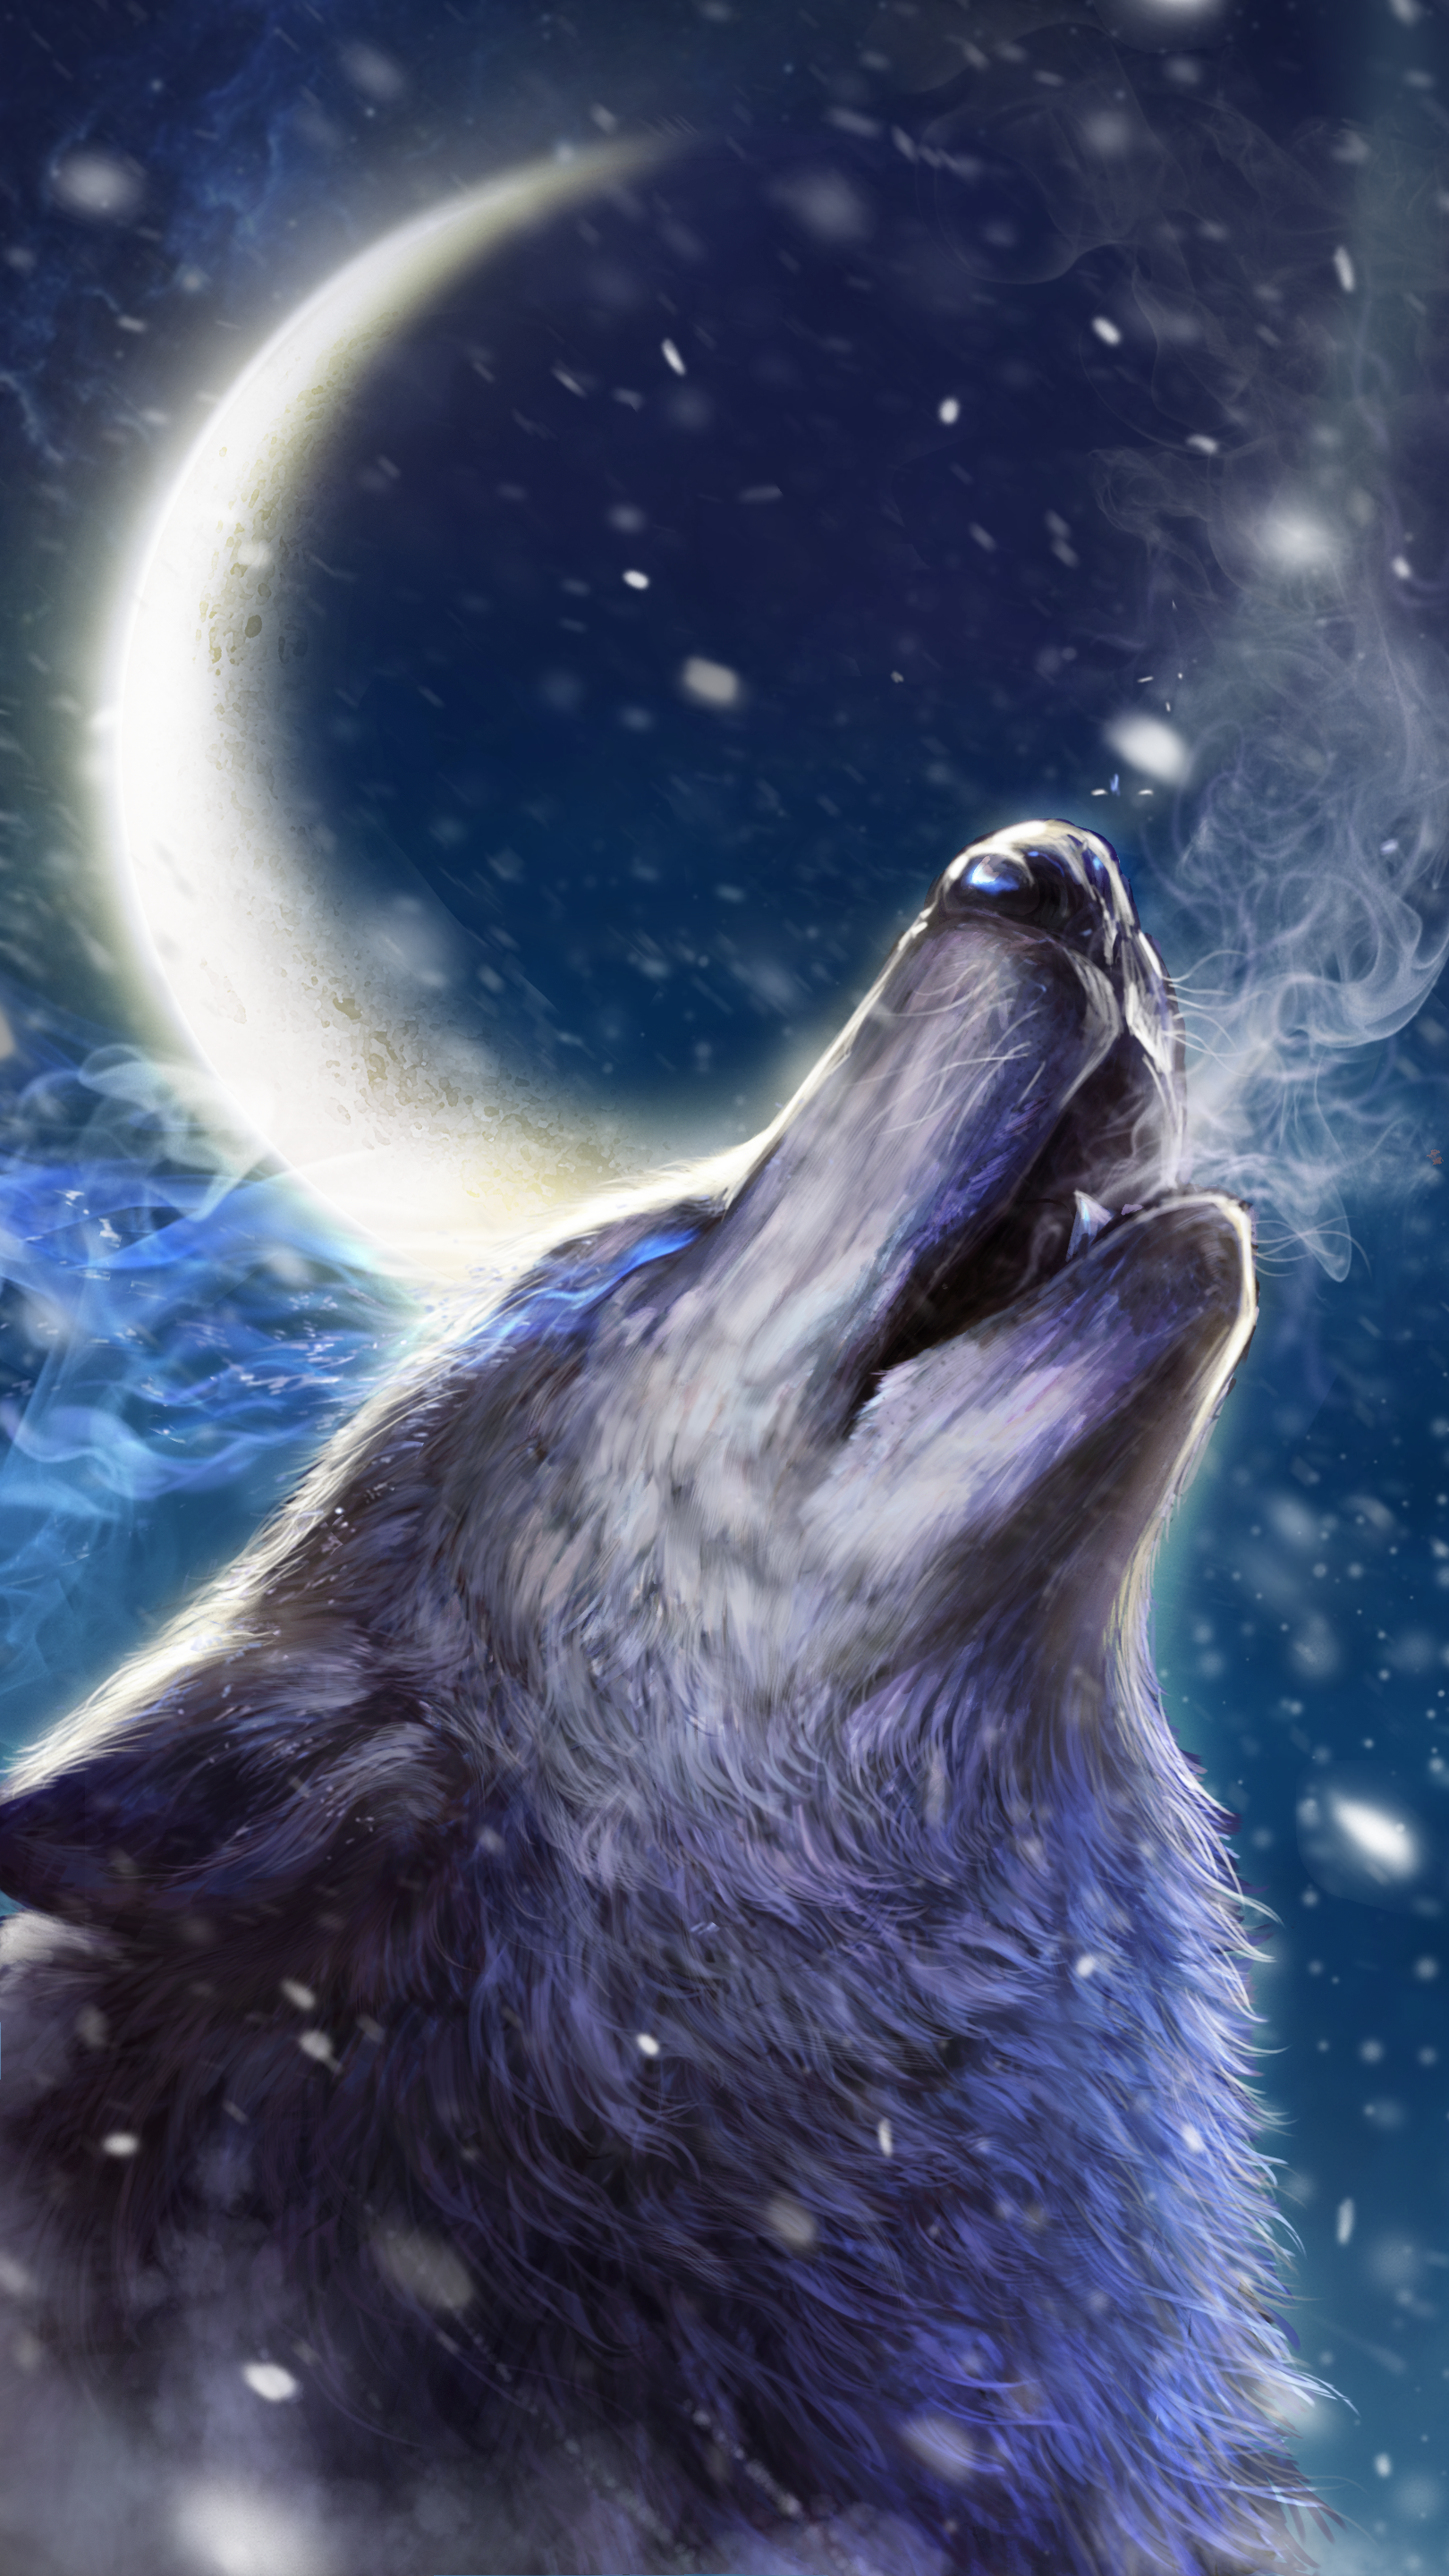 Howling Wolf Live Wallpaper Android From